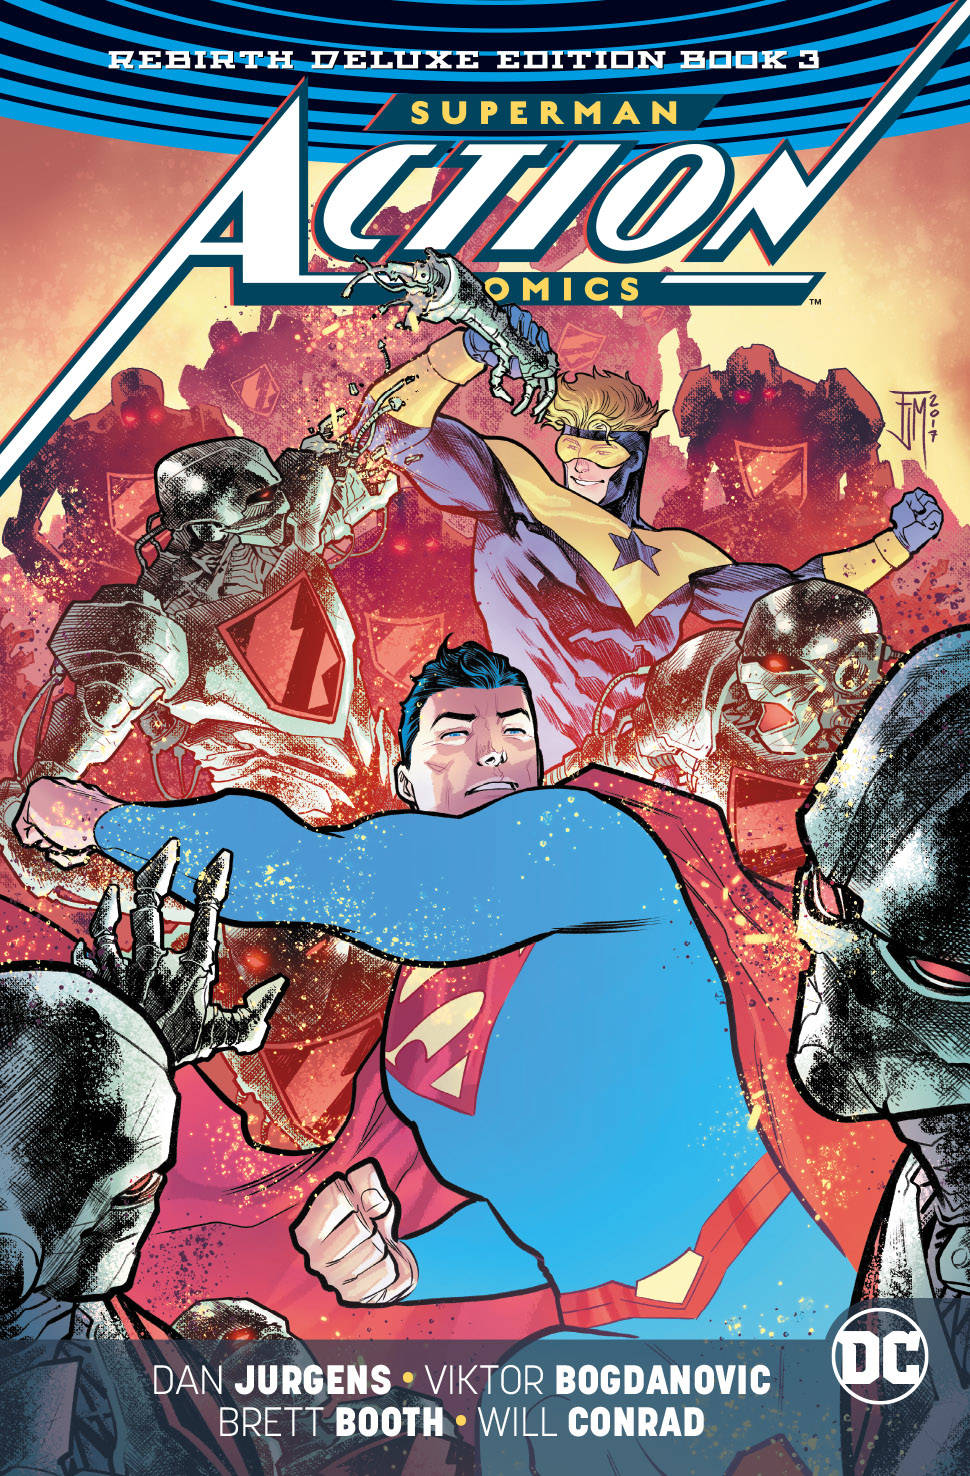 Superman Action Comics Rebirth Deluxe Collected Hardcover Book 3